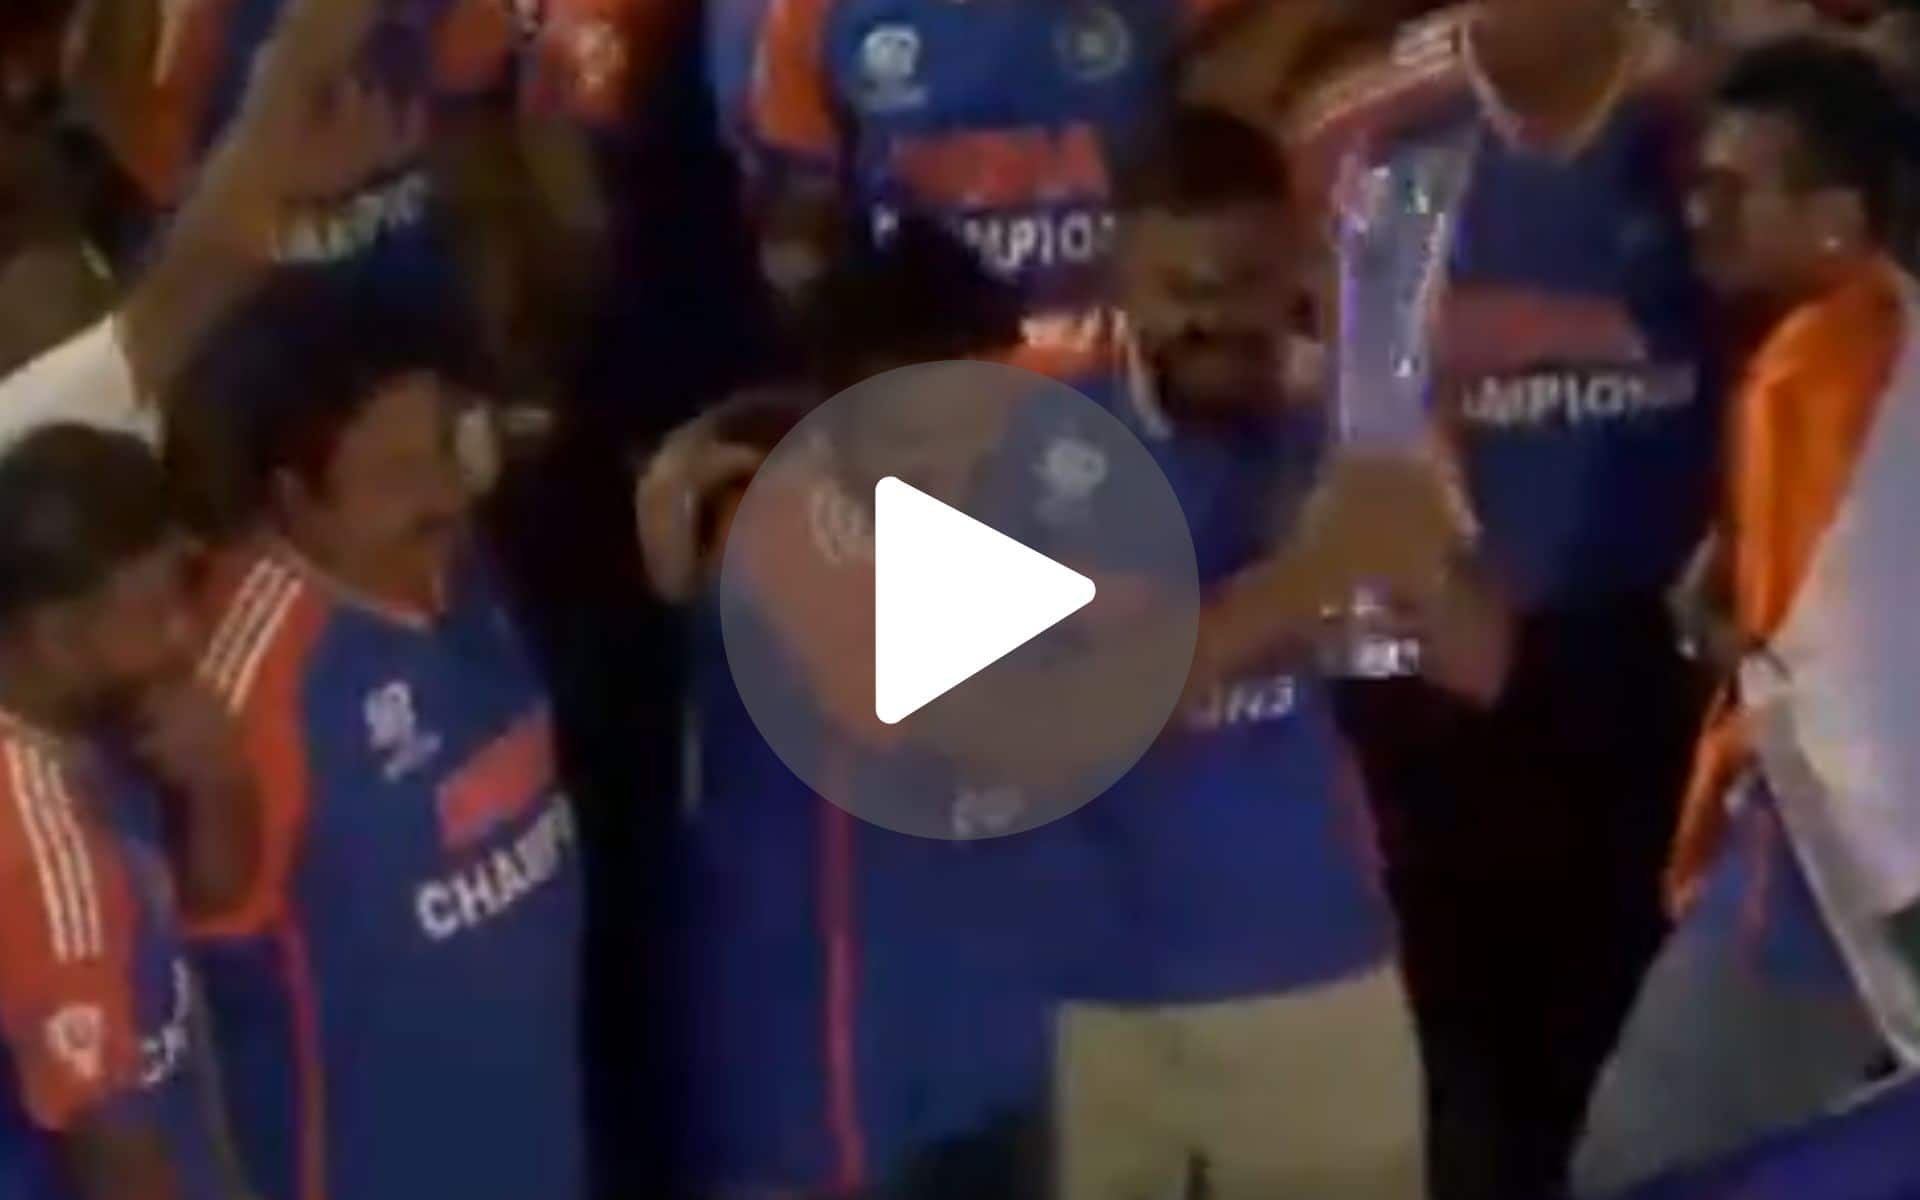 [Watch] Virat Kohli, Rohit Sharma Lift T20 World Cup Trophy With Big Roar In Victory Parade